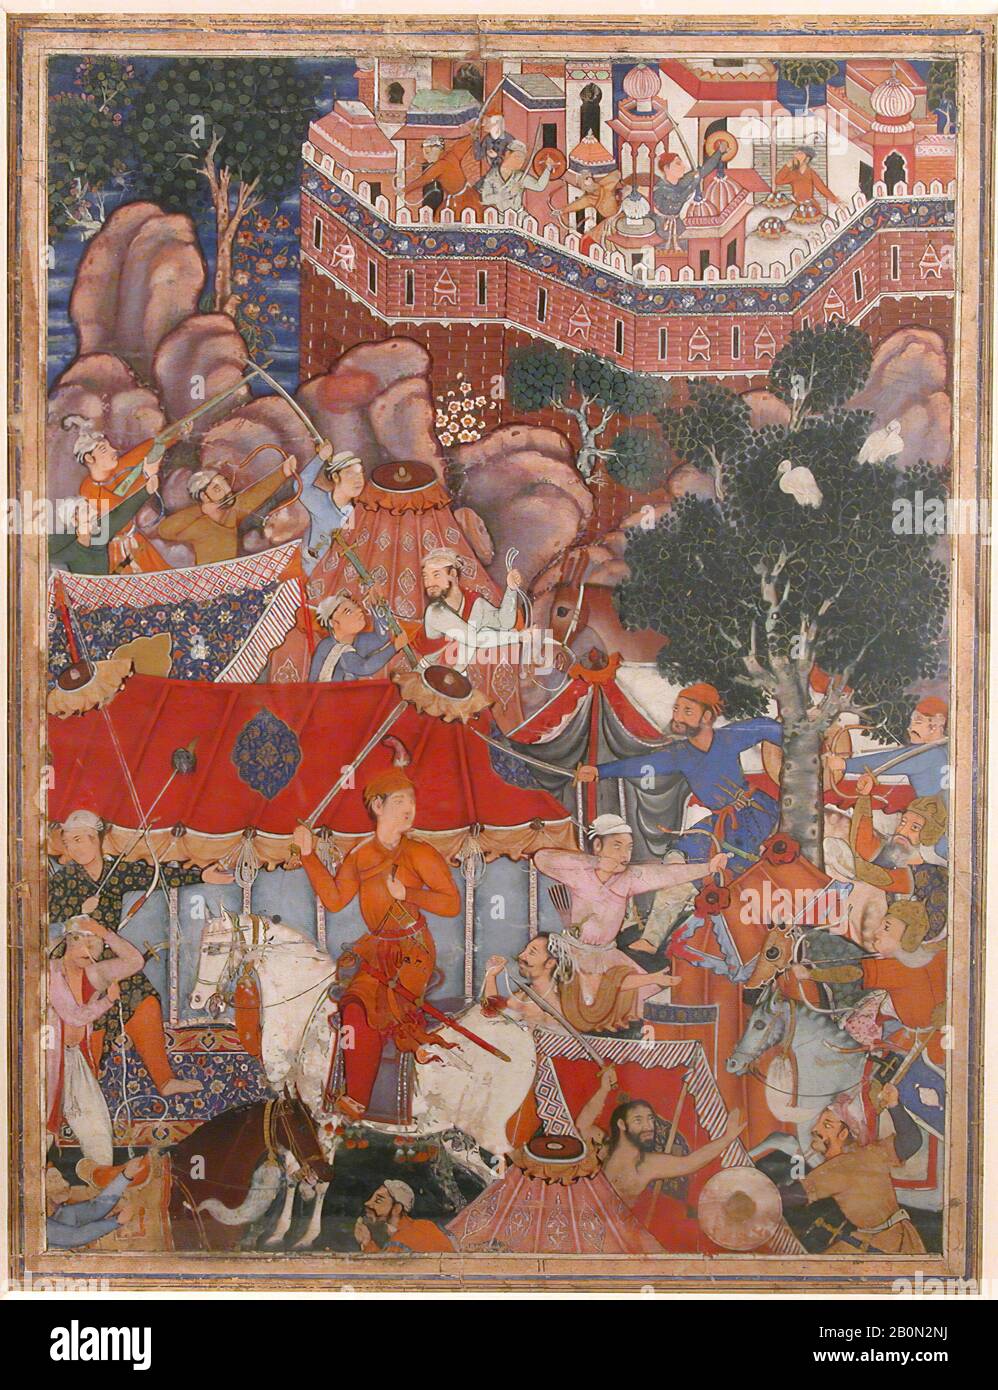 Attributed to Basavana, 'Assad Ibn Kariba Launches a Night Attack on the Camp of Malik Iraj', Folio from a Hamzanama (The Adventures of Hamza), Attributed to Basavana, Attributed to Shravana, Attributed to Tara (Indian, active mid-16th century), Folio from an illustrated manuscript, ca. 1564–69, Attributed to India, Ink, opaque watercolor, and gold on cloth; mounted on paper, H. 27 in. (68.6 cm), W. 21 1/4 in. (54 cm), Codices Stock Photo